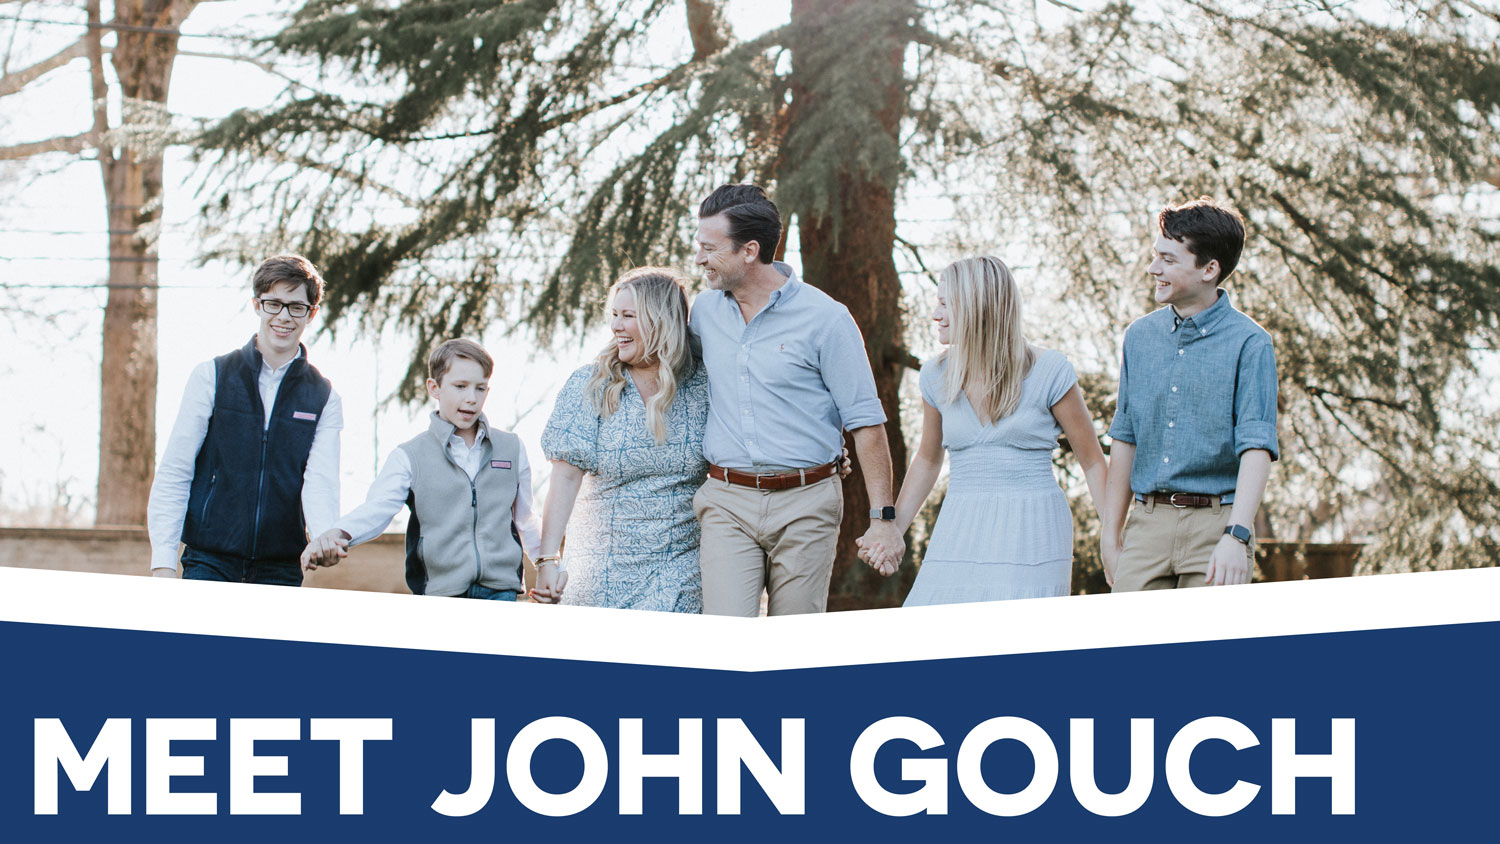 John Gouch for State House